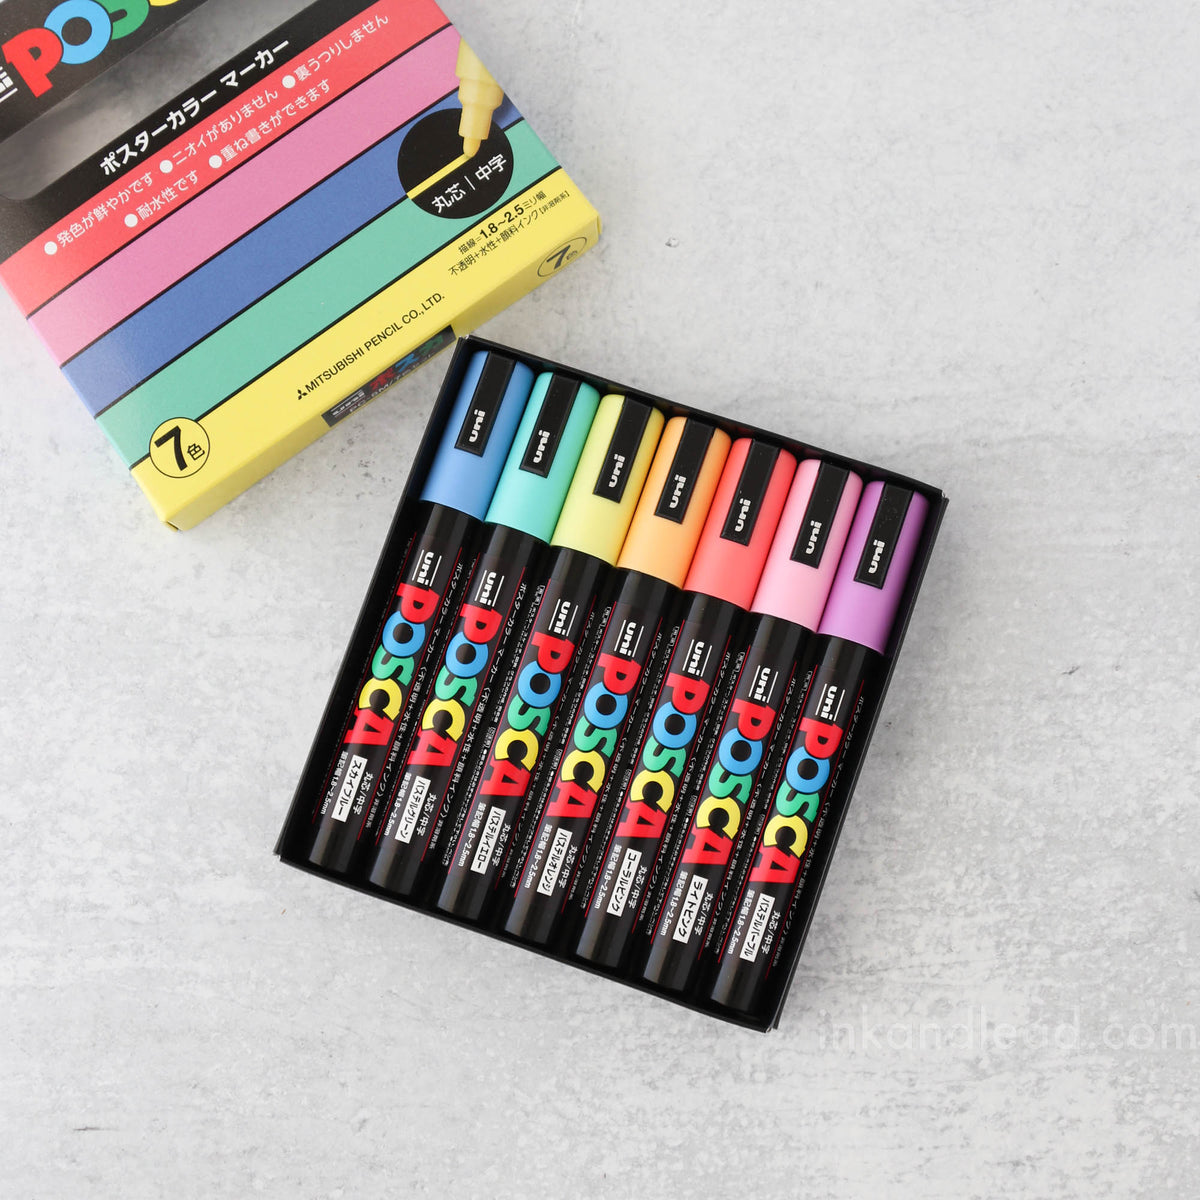 Buy 7 Pastel Posca Paint Markers, 5M Medium Posca Markers with